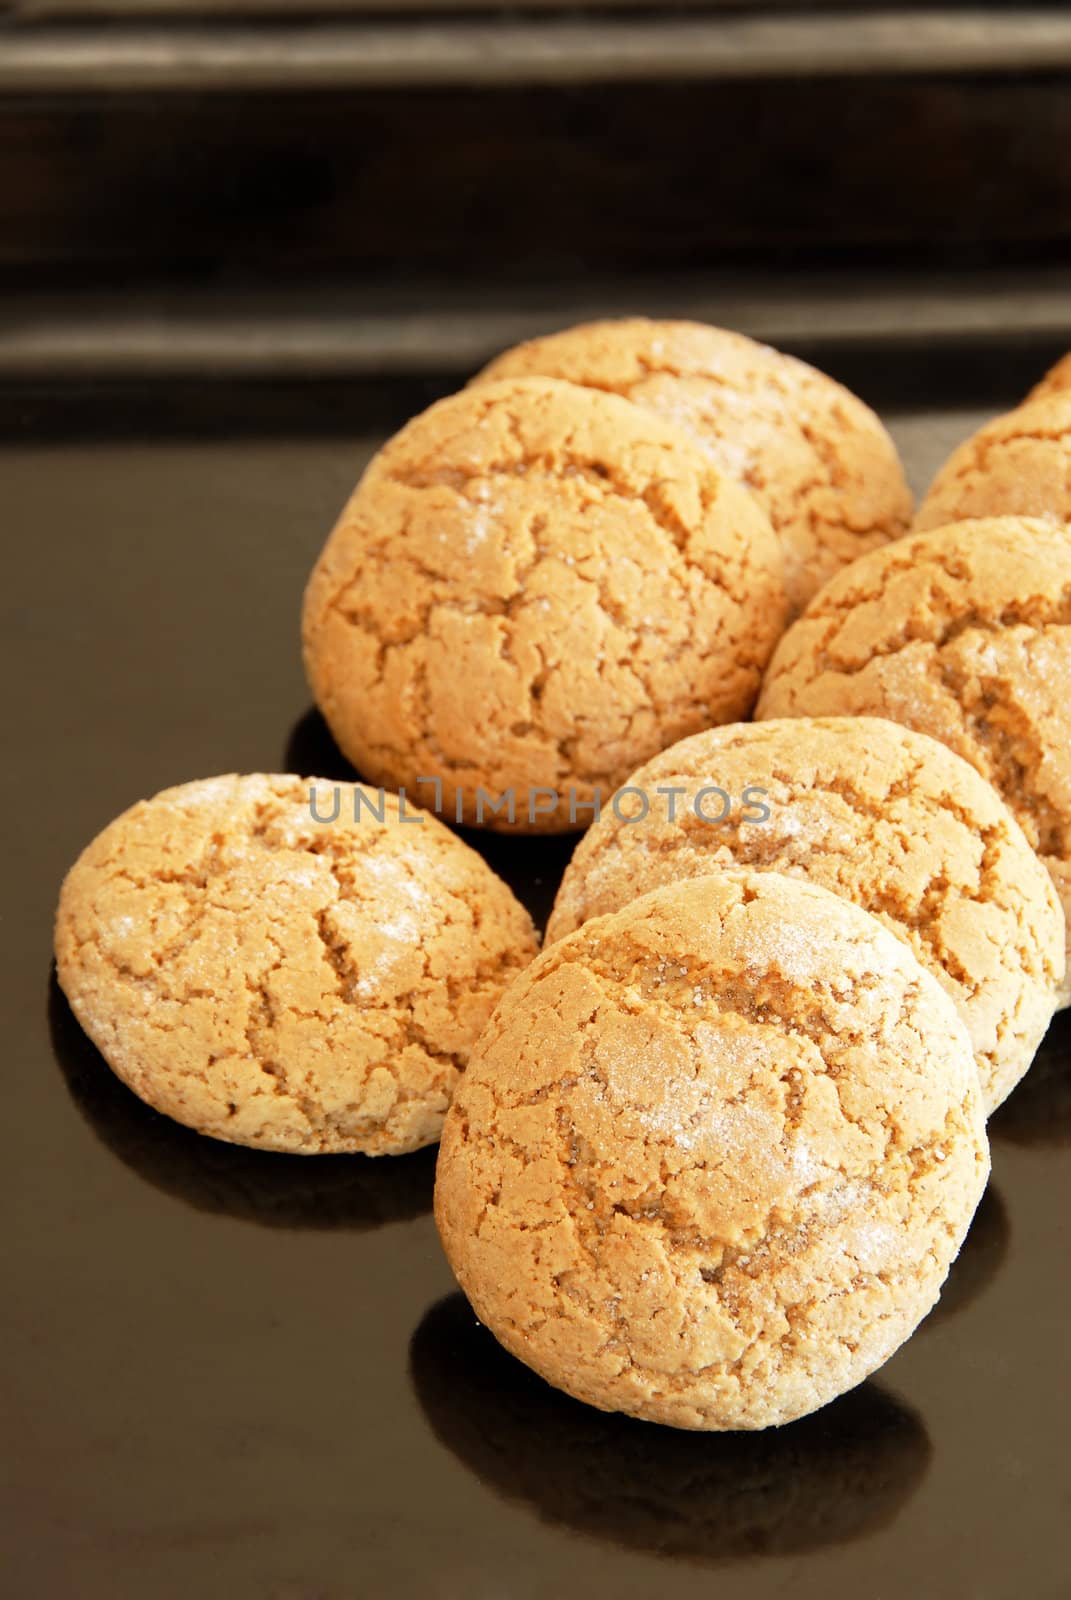 Oatmeal cookies by simply